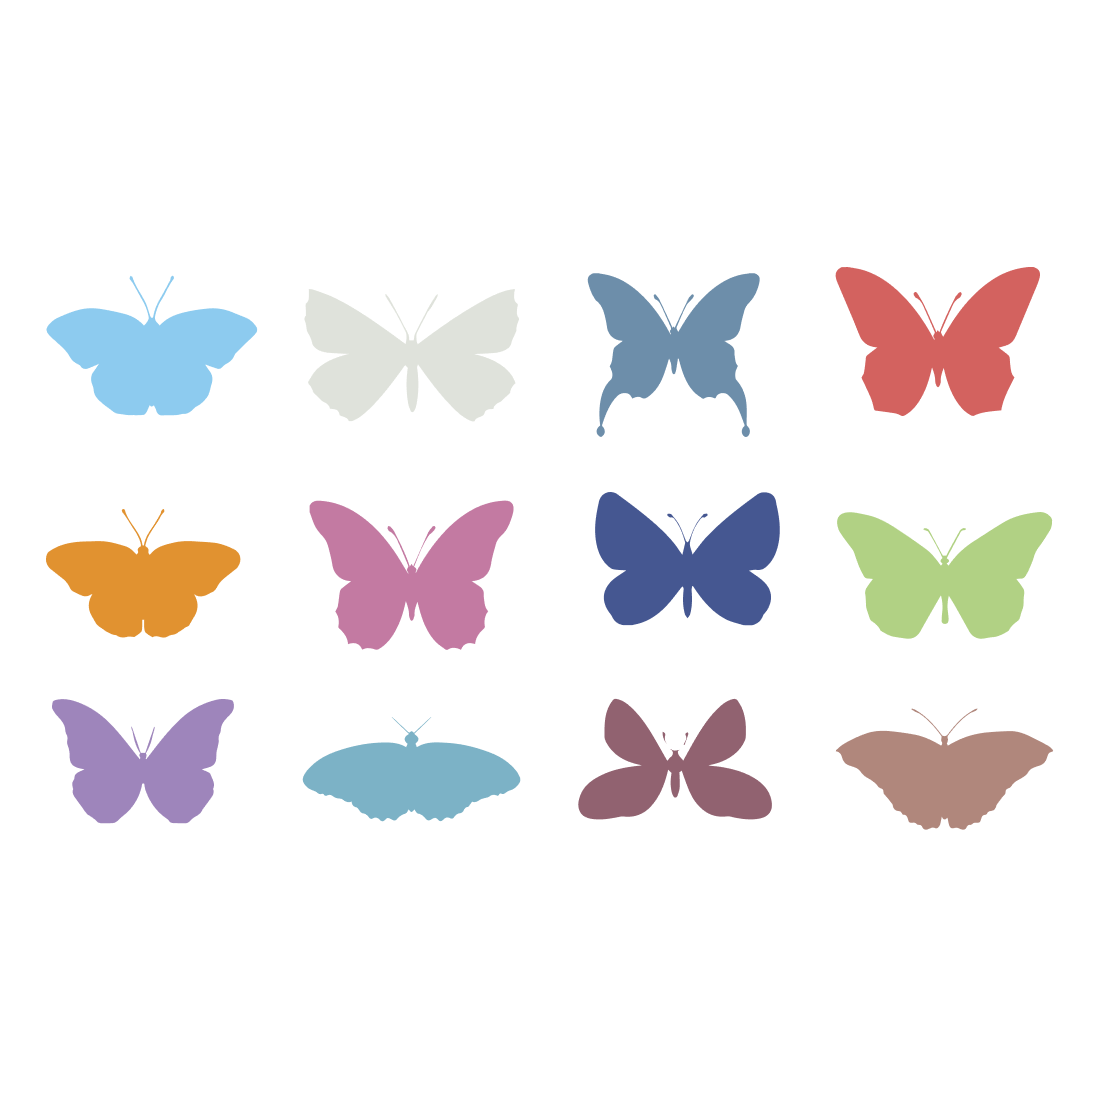 Group of different colored butterflies on a white background.